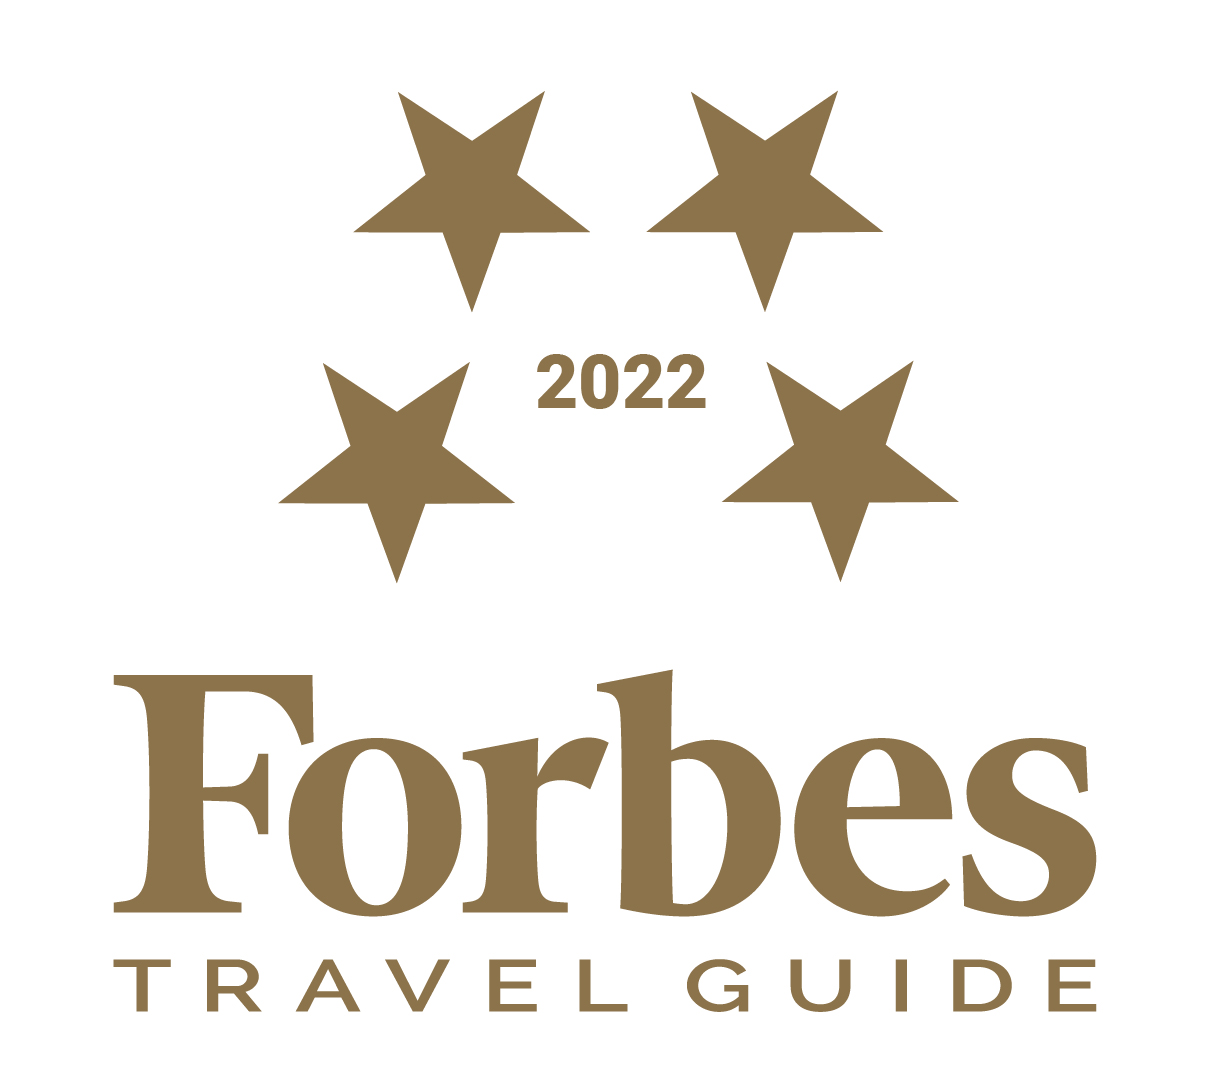 “Forbes Travel Guide 2022” Awarded 4 stars 3 years in a row